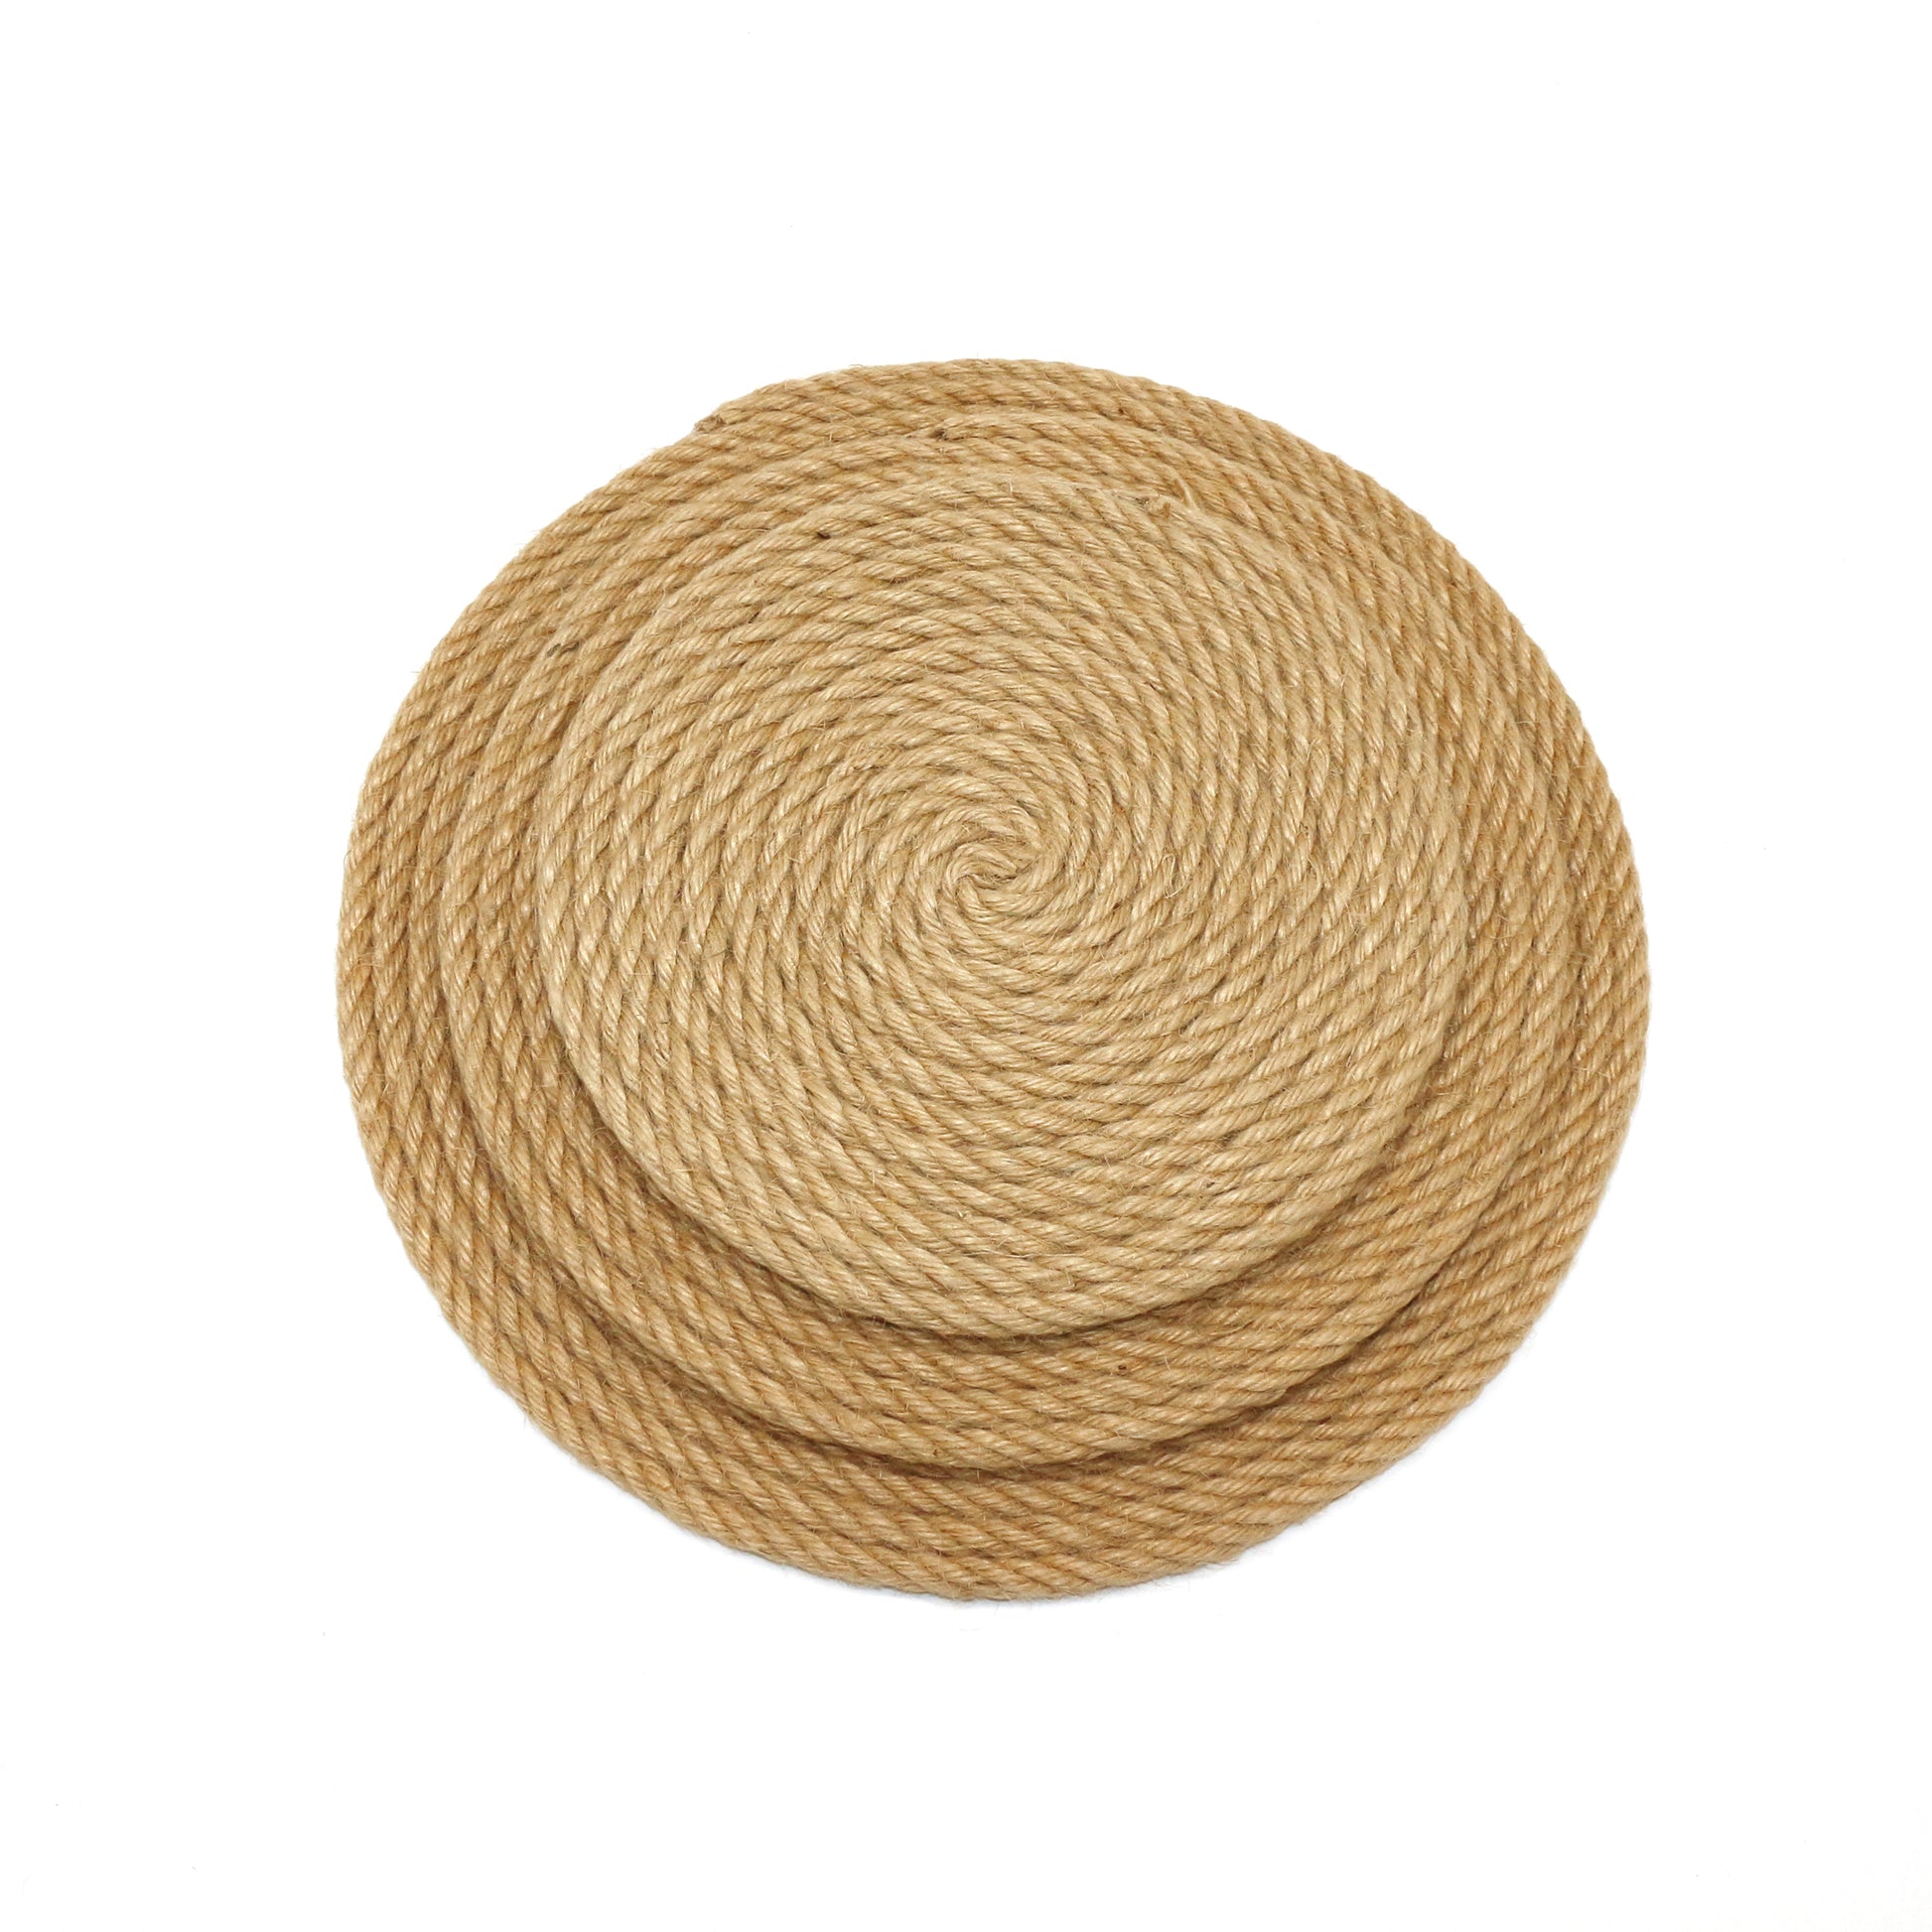 Hemp Rope Round Disc for Wall Hanging, Indoor DIY Wall Art